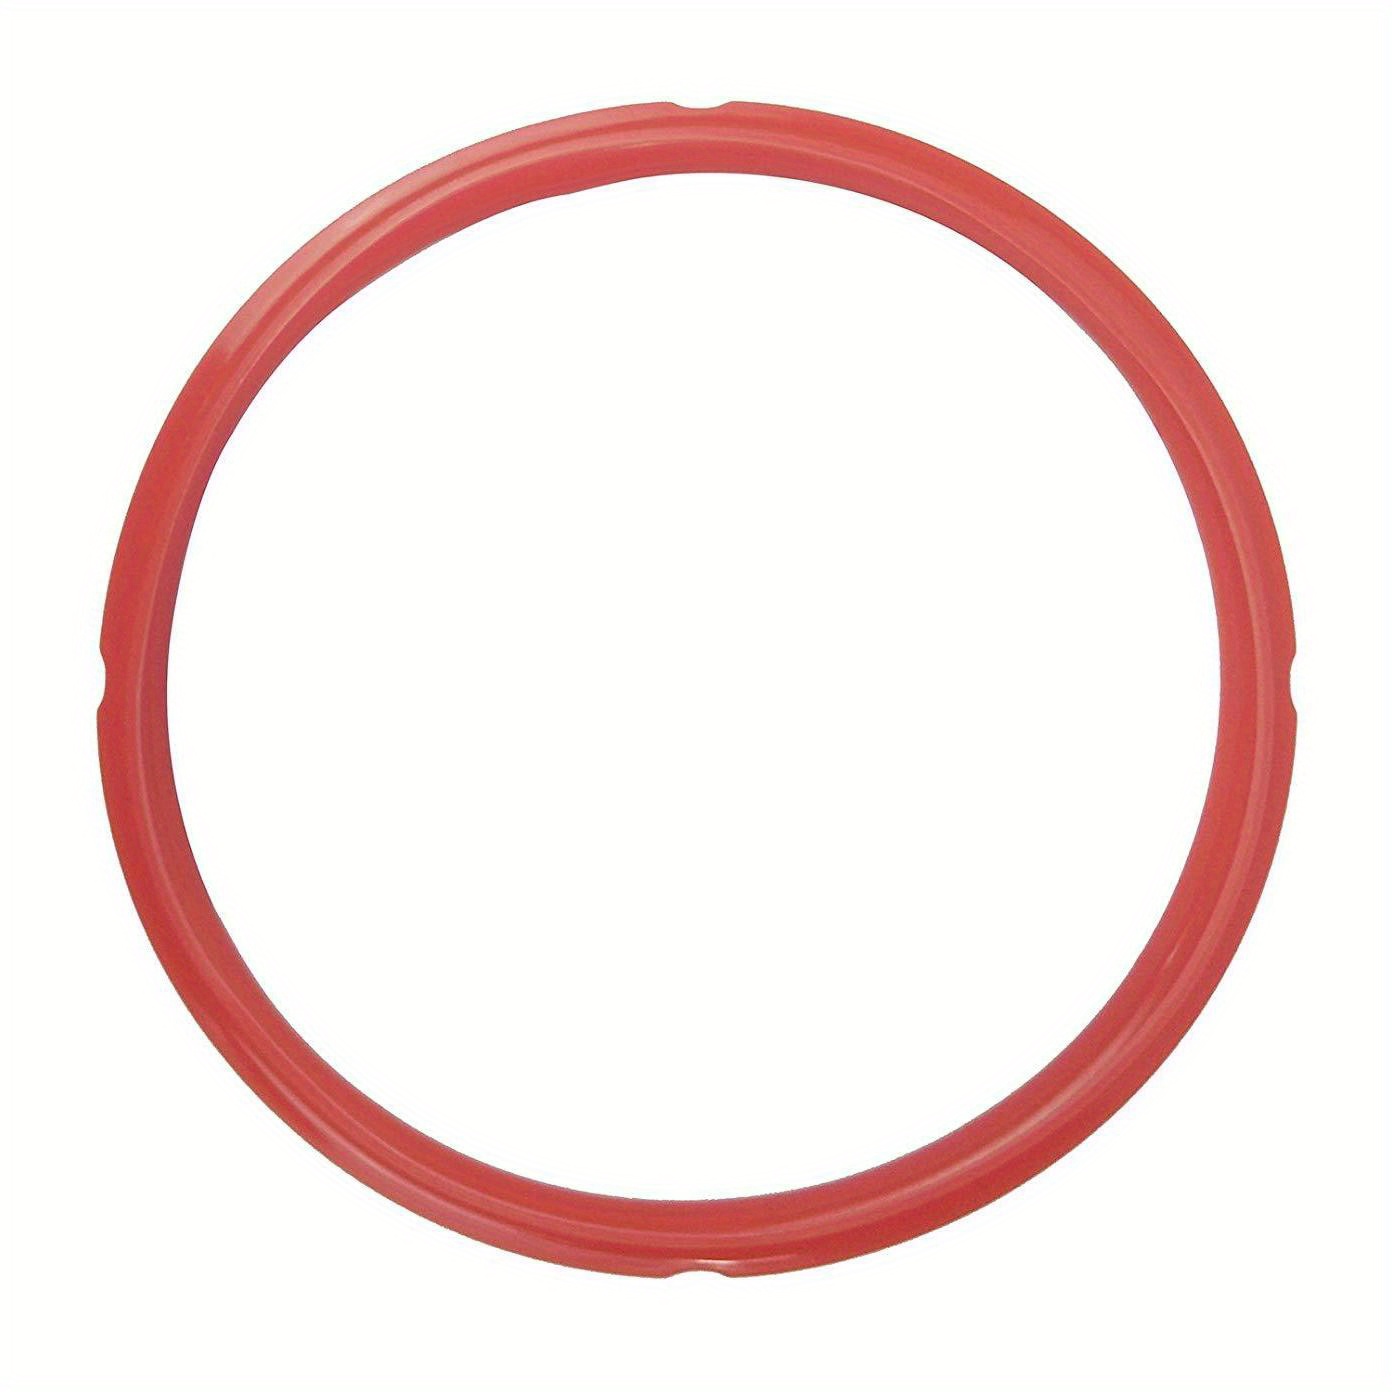 Dropship 3pcs New Silicone Seal Rings Gasket For Instant Pot Blue